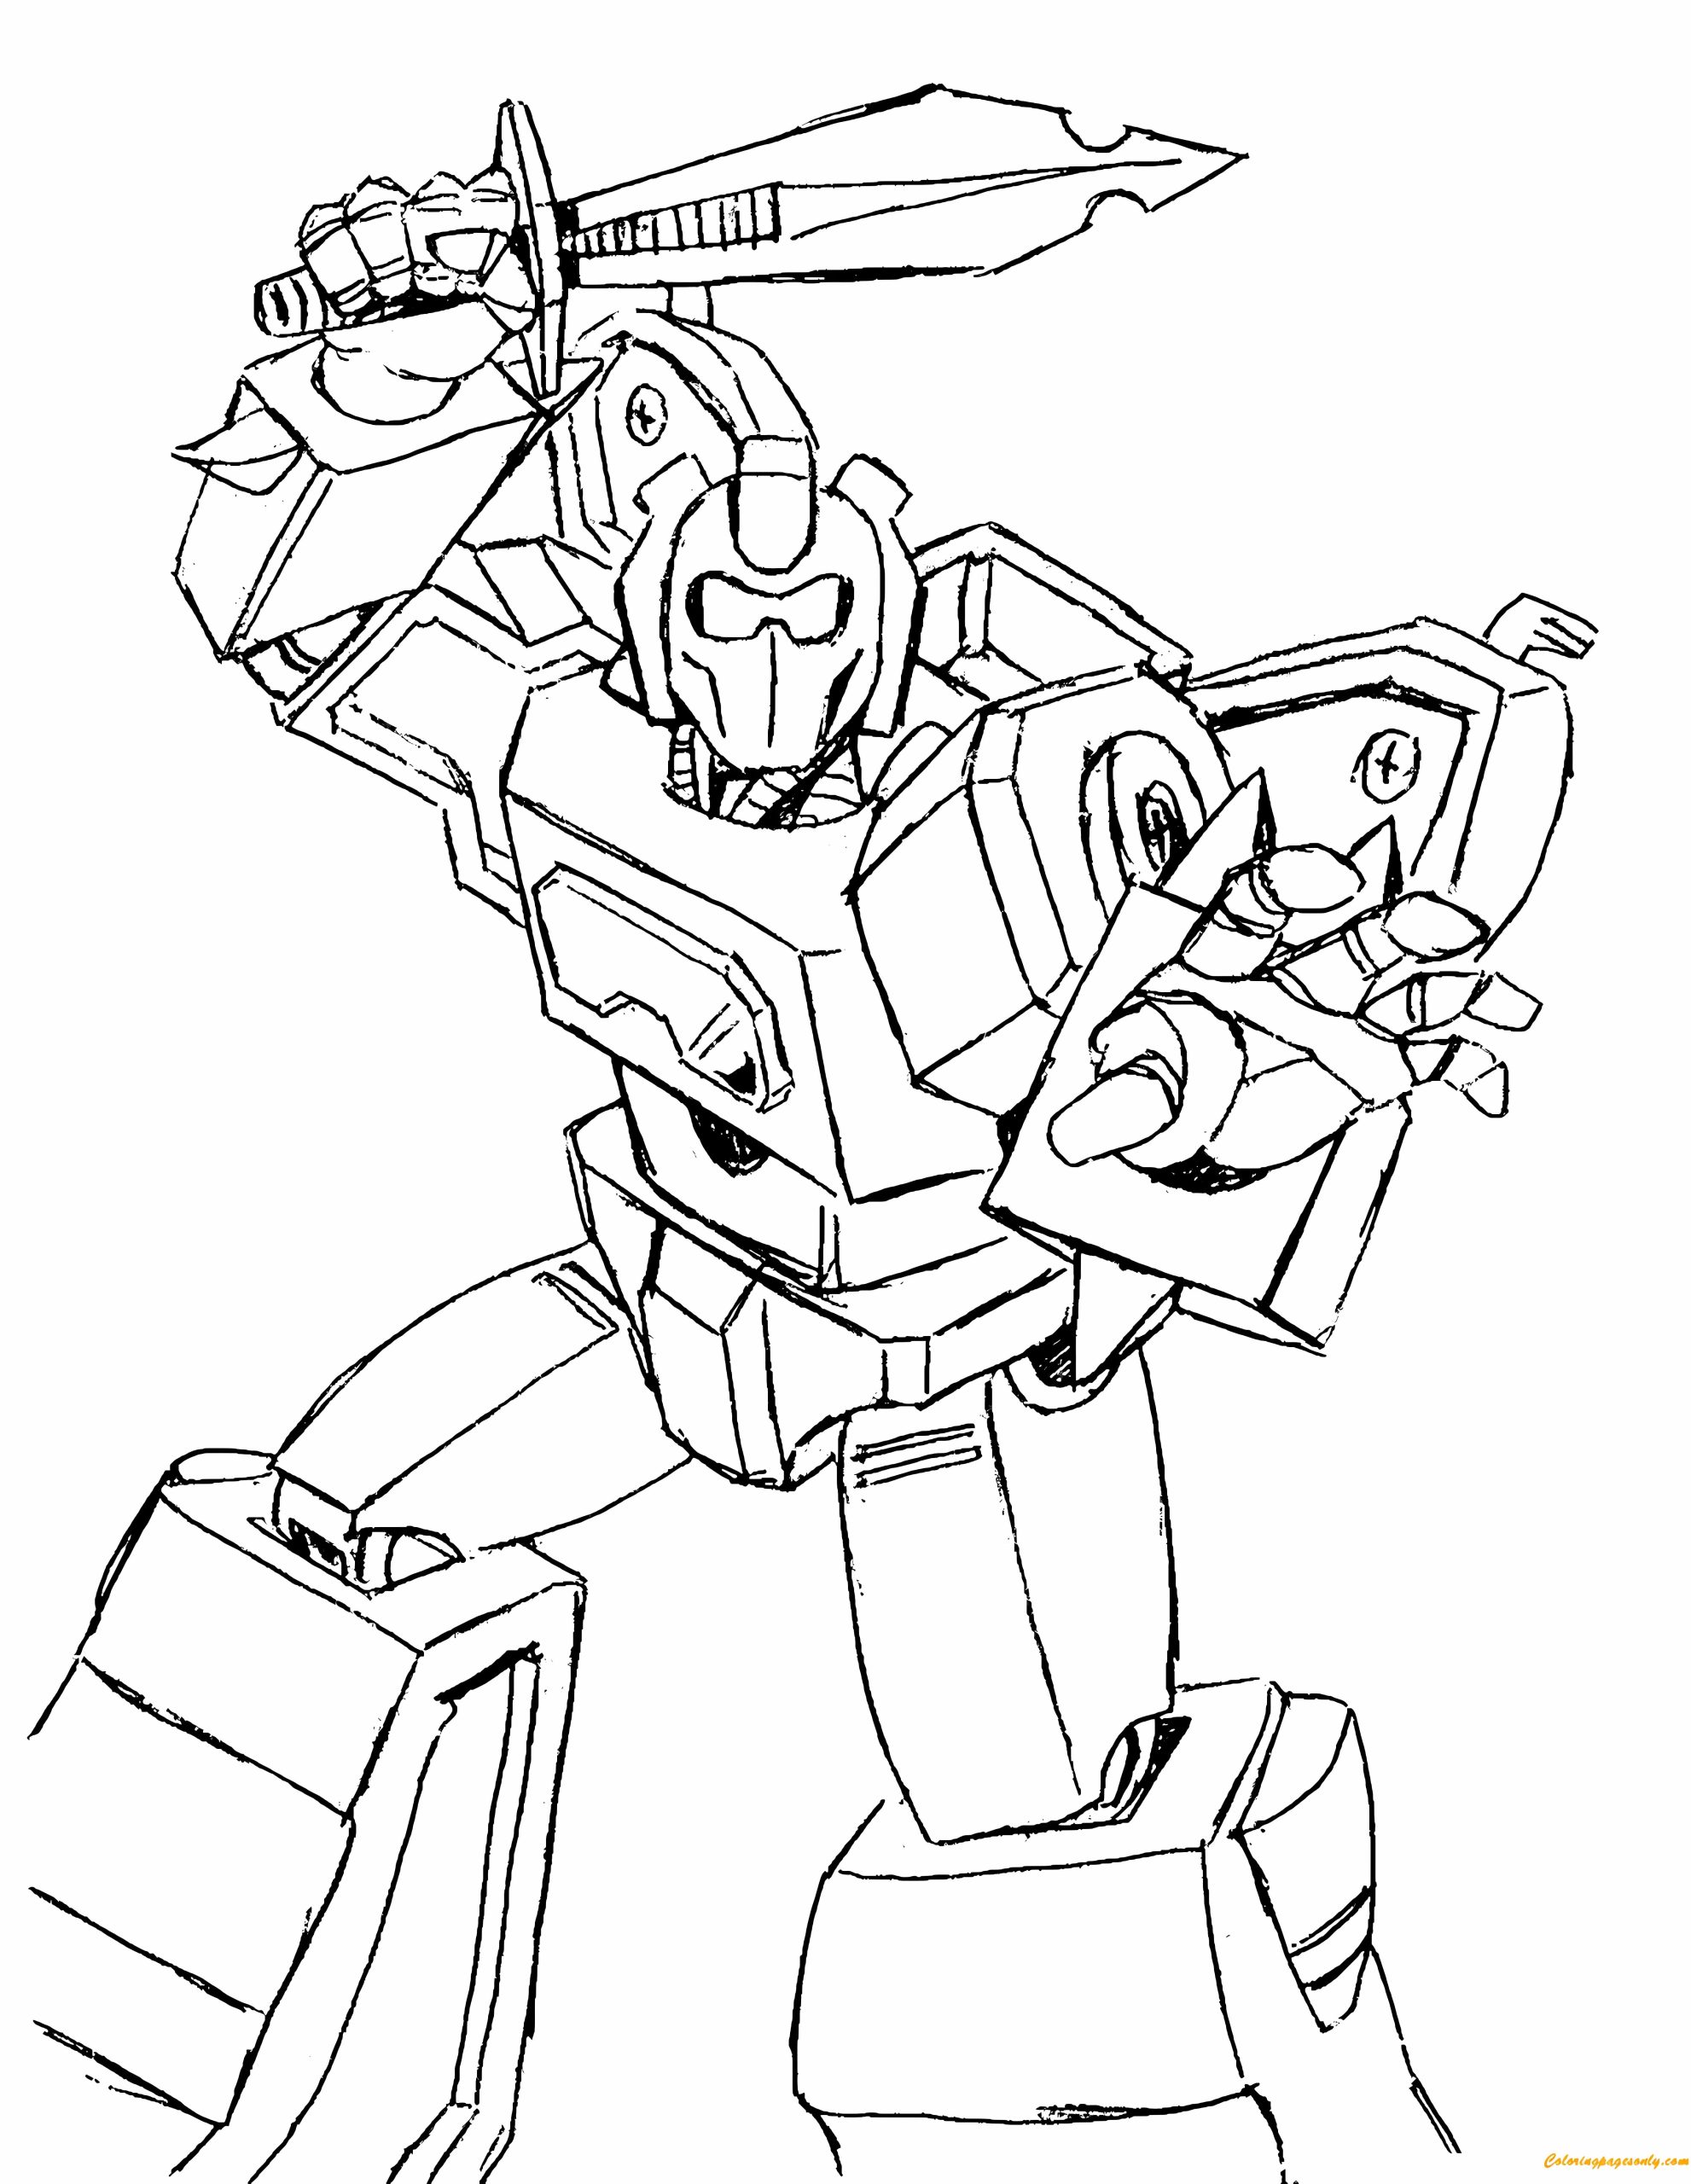 Transformers 3 Fighting Coloring Pages